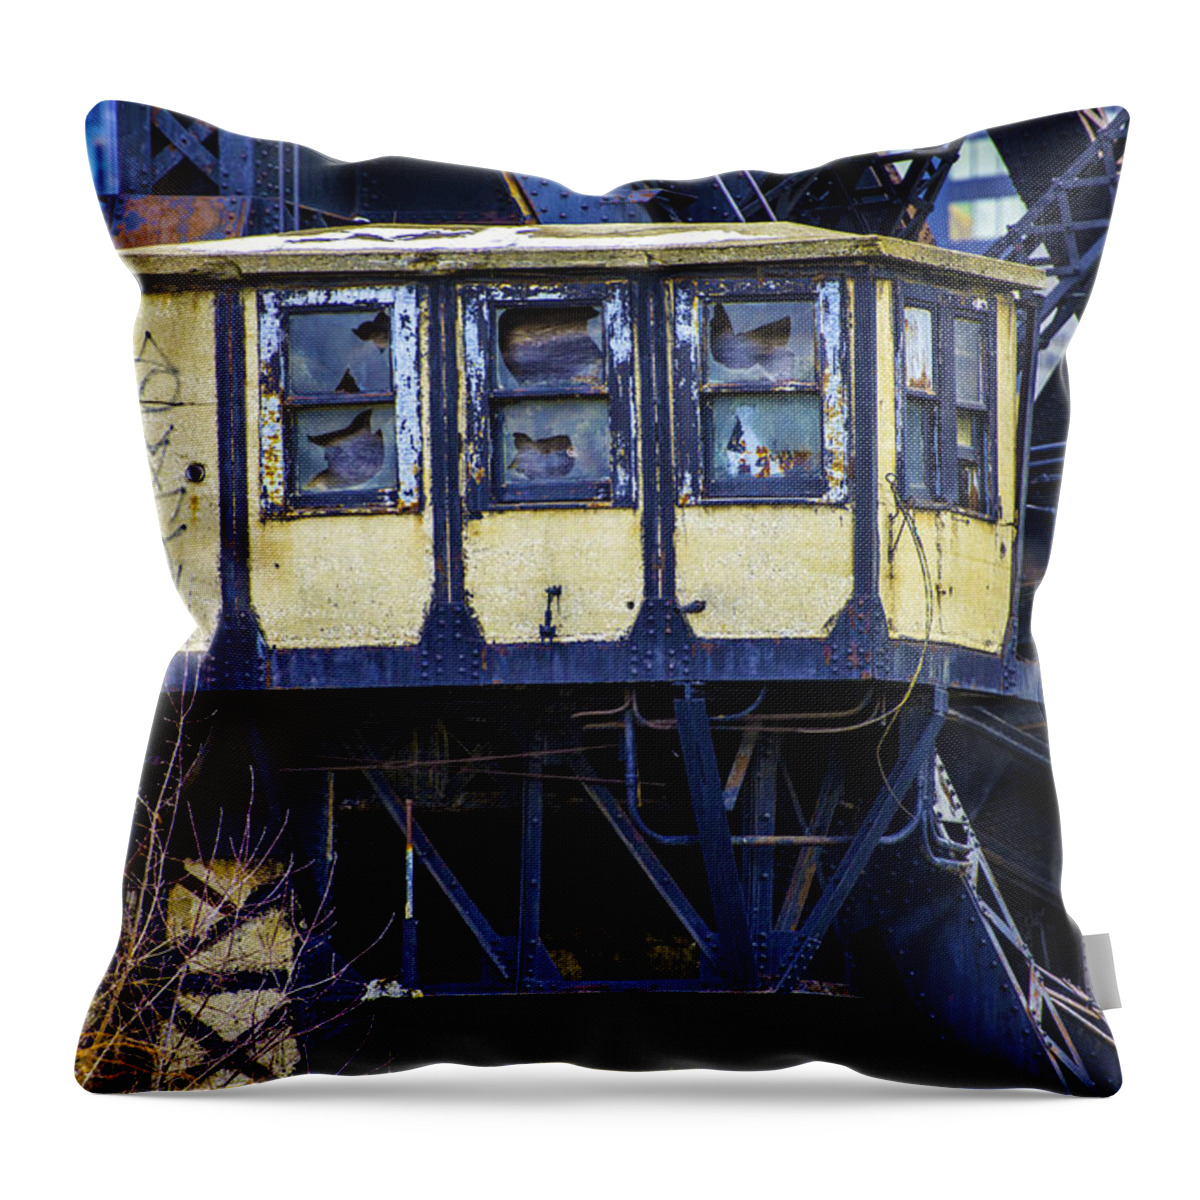  Throw Pillow featuring the photograph Bridge House by Raymond Kunst